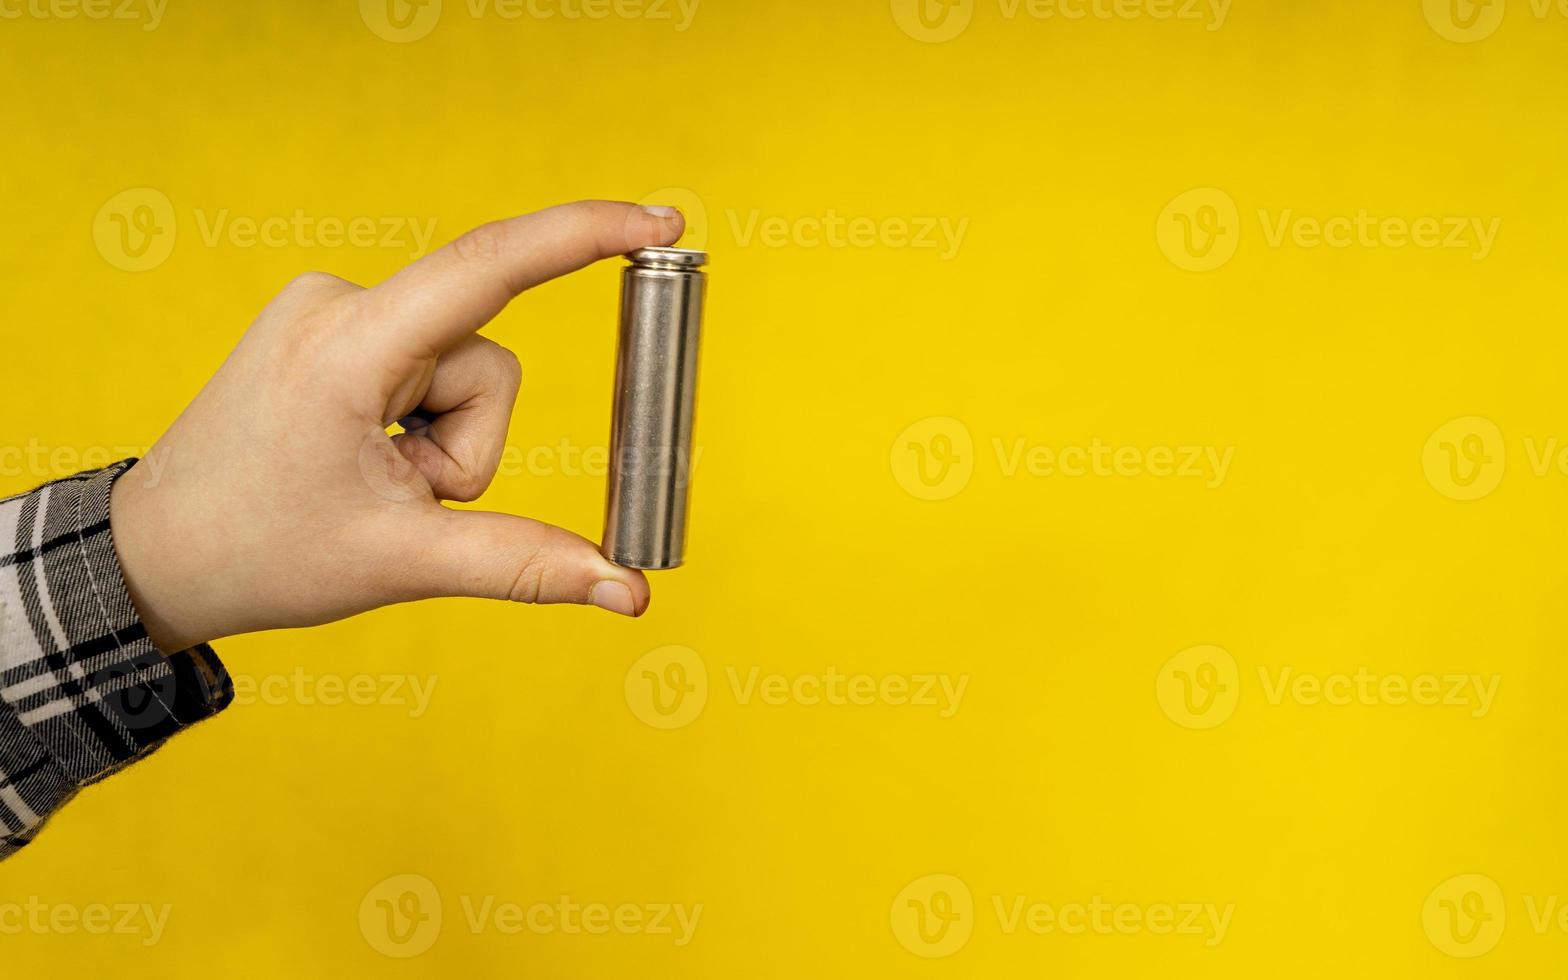 battery in hand close up on a yellow background photo